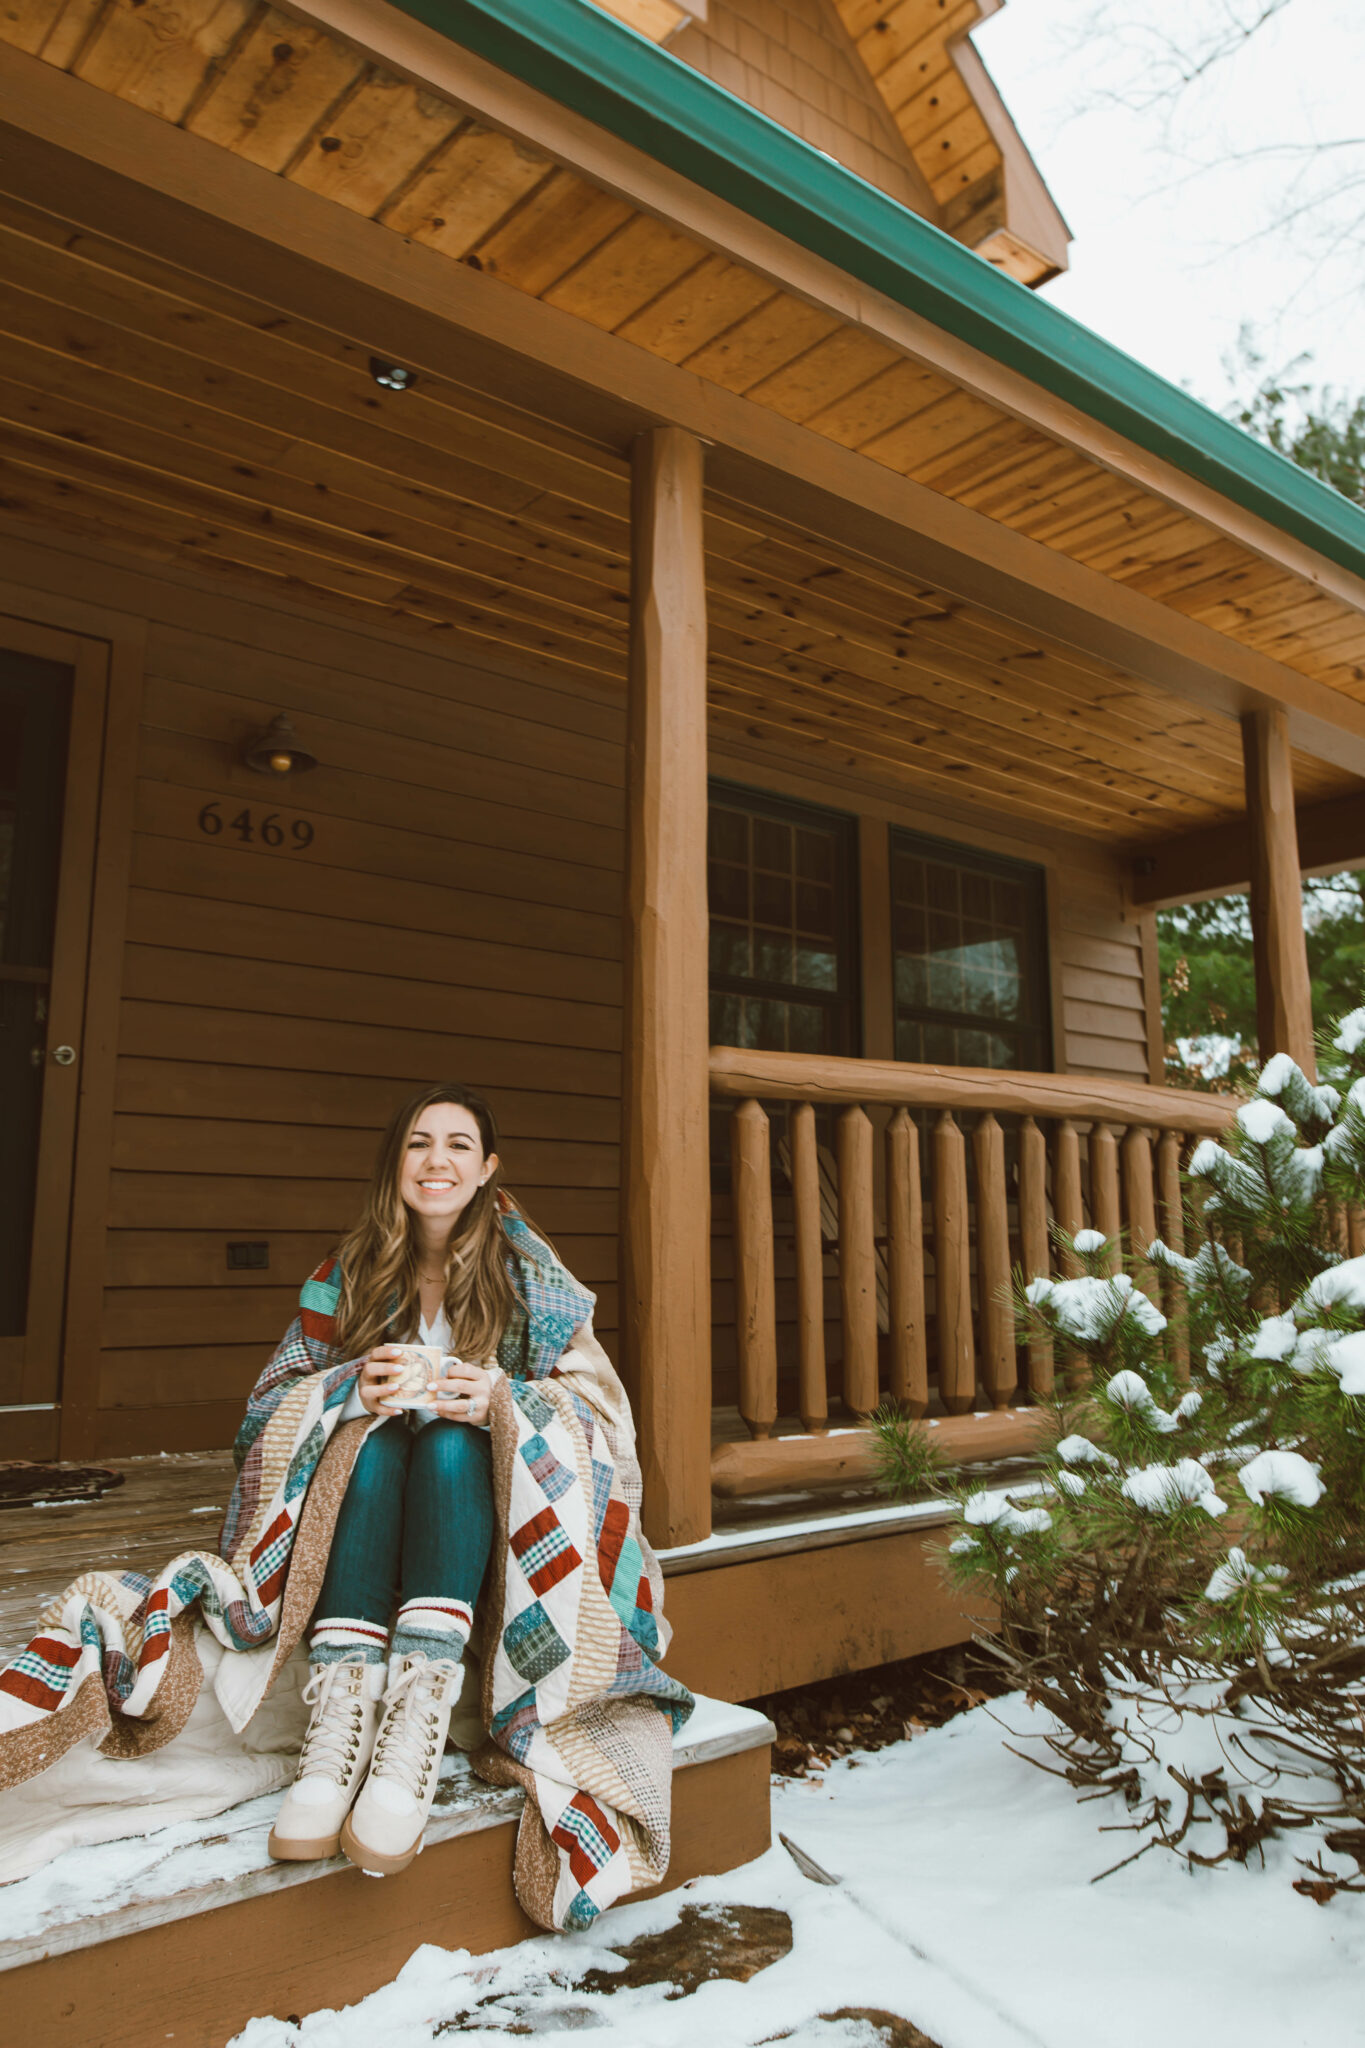 Fashion Basics by popular Chicago fashion blog, Glass of Glam: image of a woman sitting on outside of her cabin on the steps of her front porched wrapped up in a blanket and wearing a white henley t-shirt, jeans, JustFab hiking boots, and cabin socks.